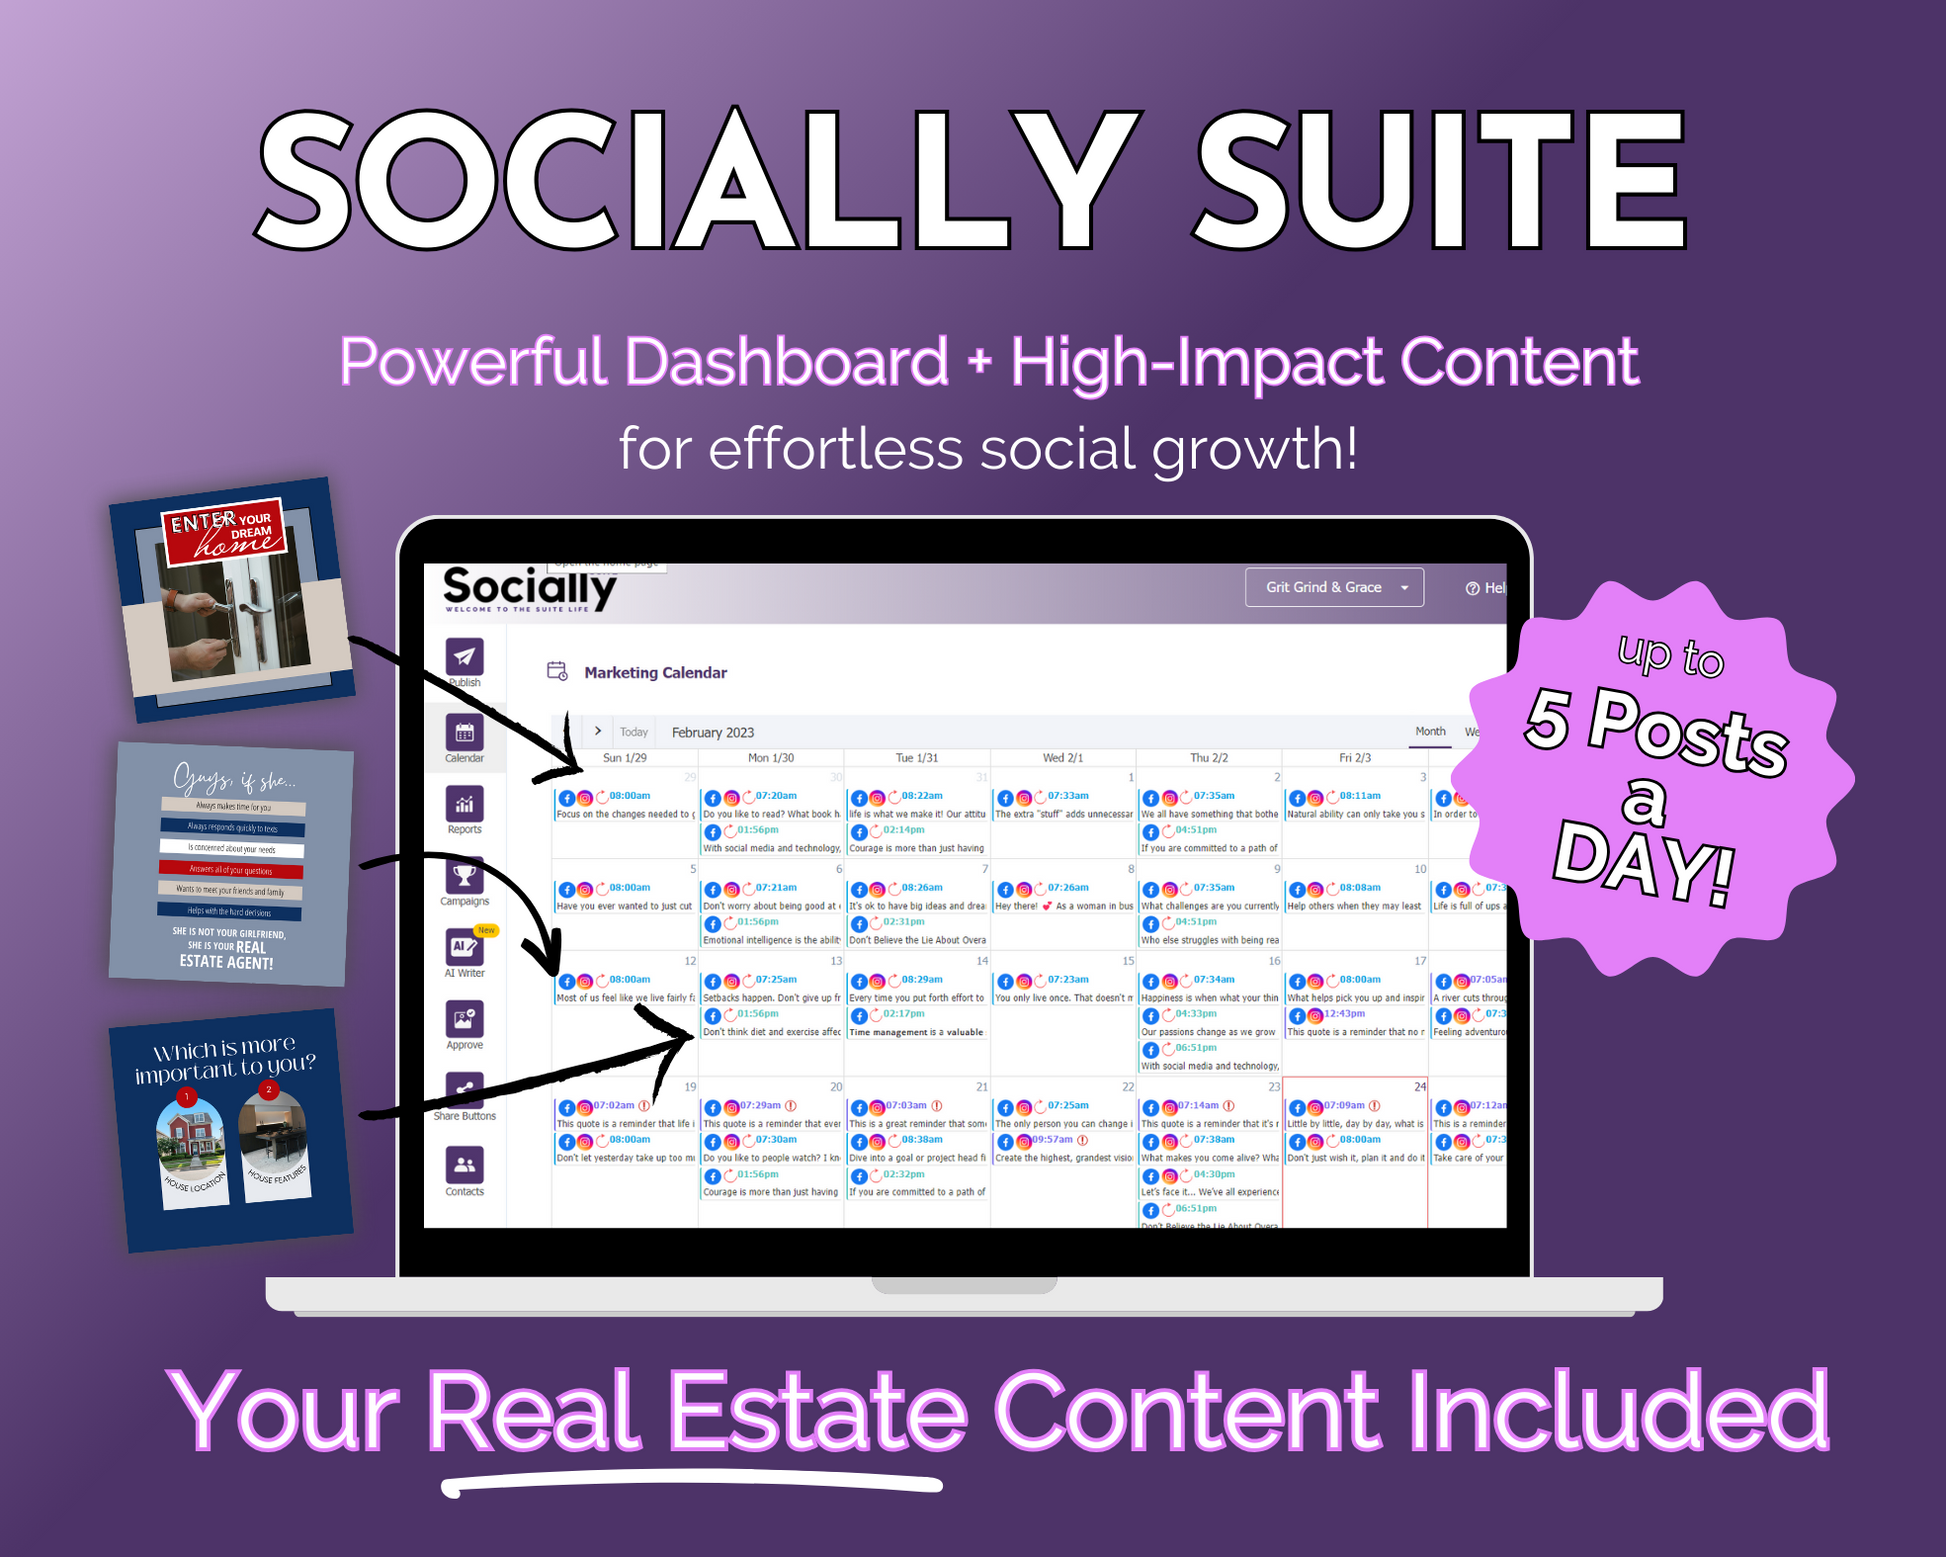 Get Socially Inclined's Socially Suite Membership - a powerful dashboard for real estate content management and enhancing online presence.